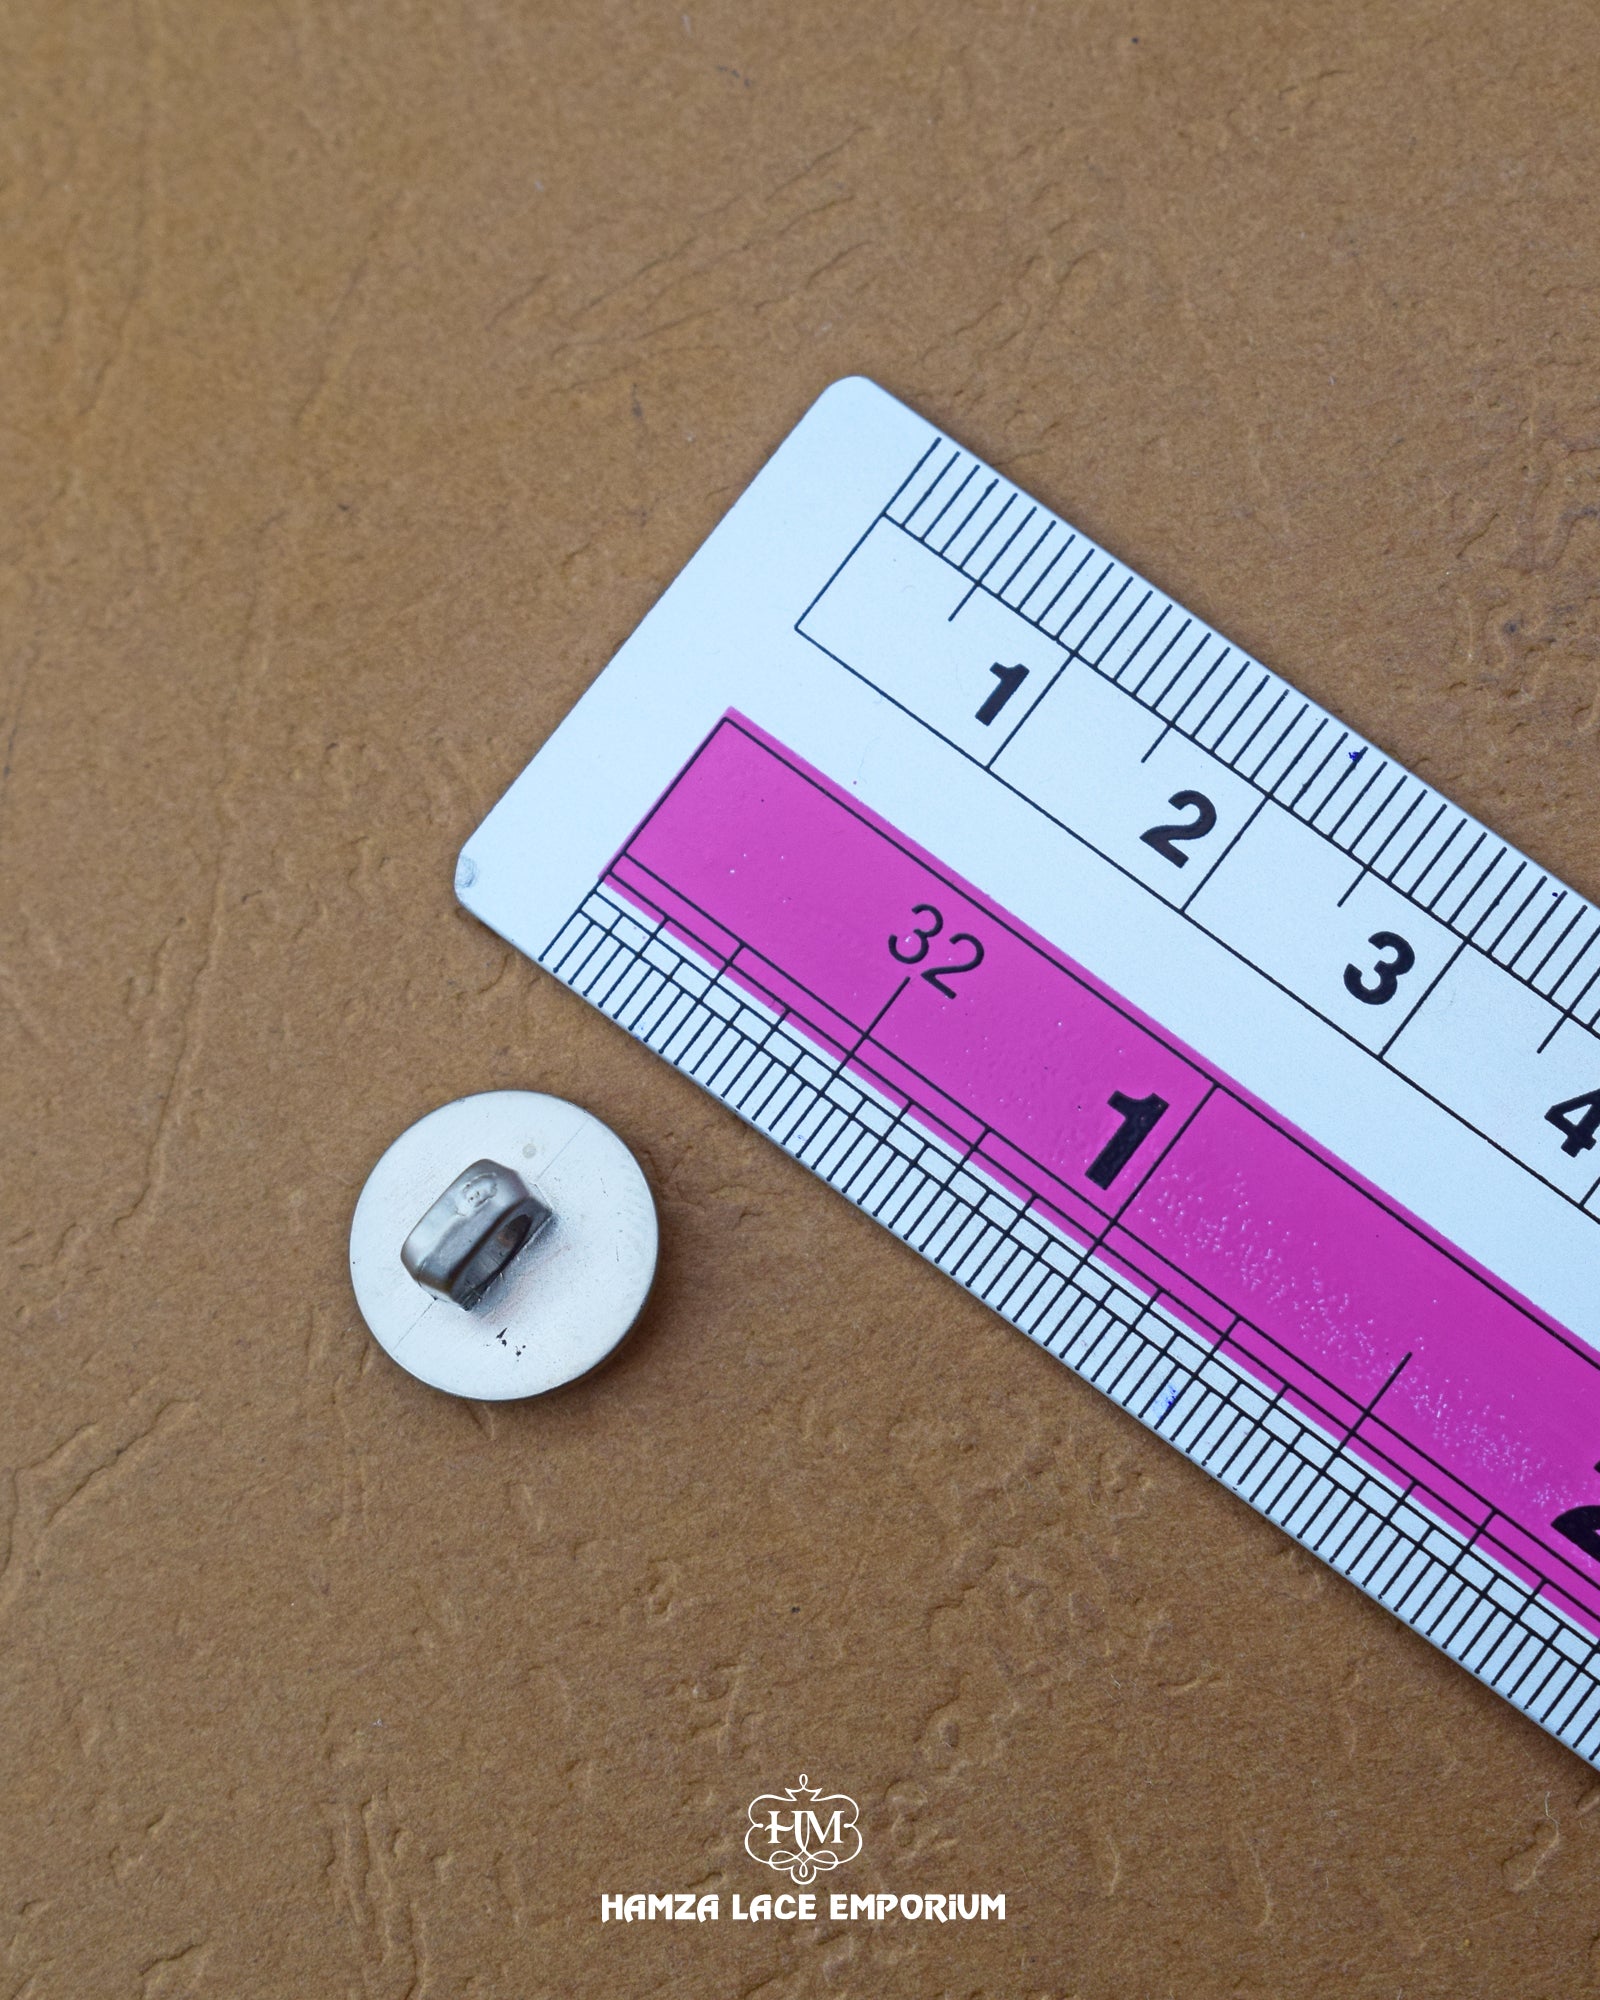 The size of the 'Metal Suiting Button MB859' is measured using a ruler.